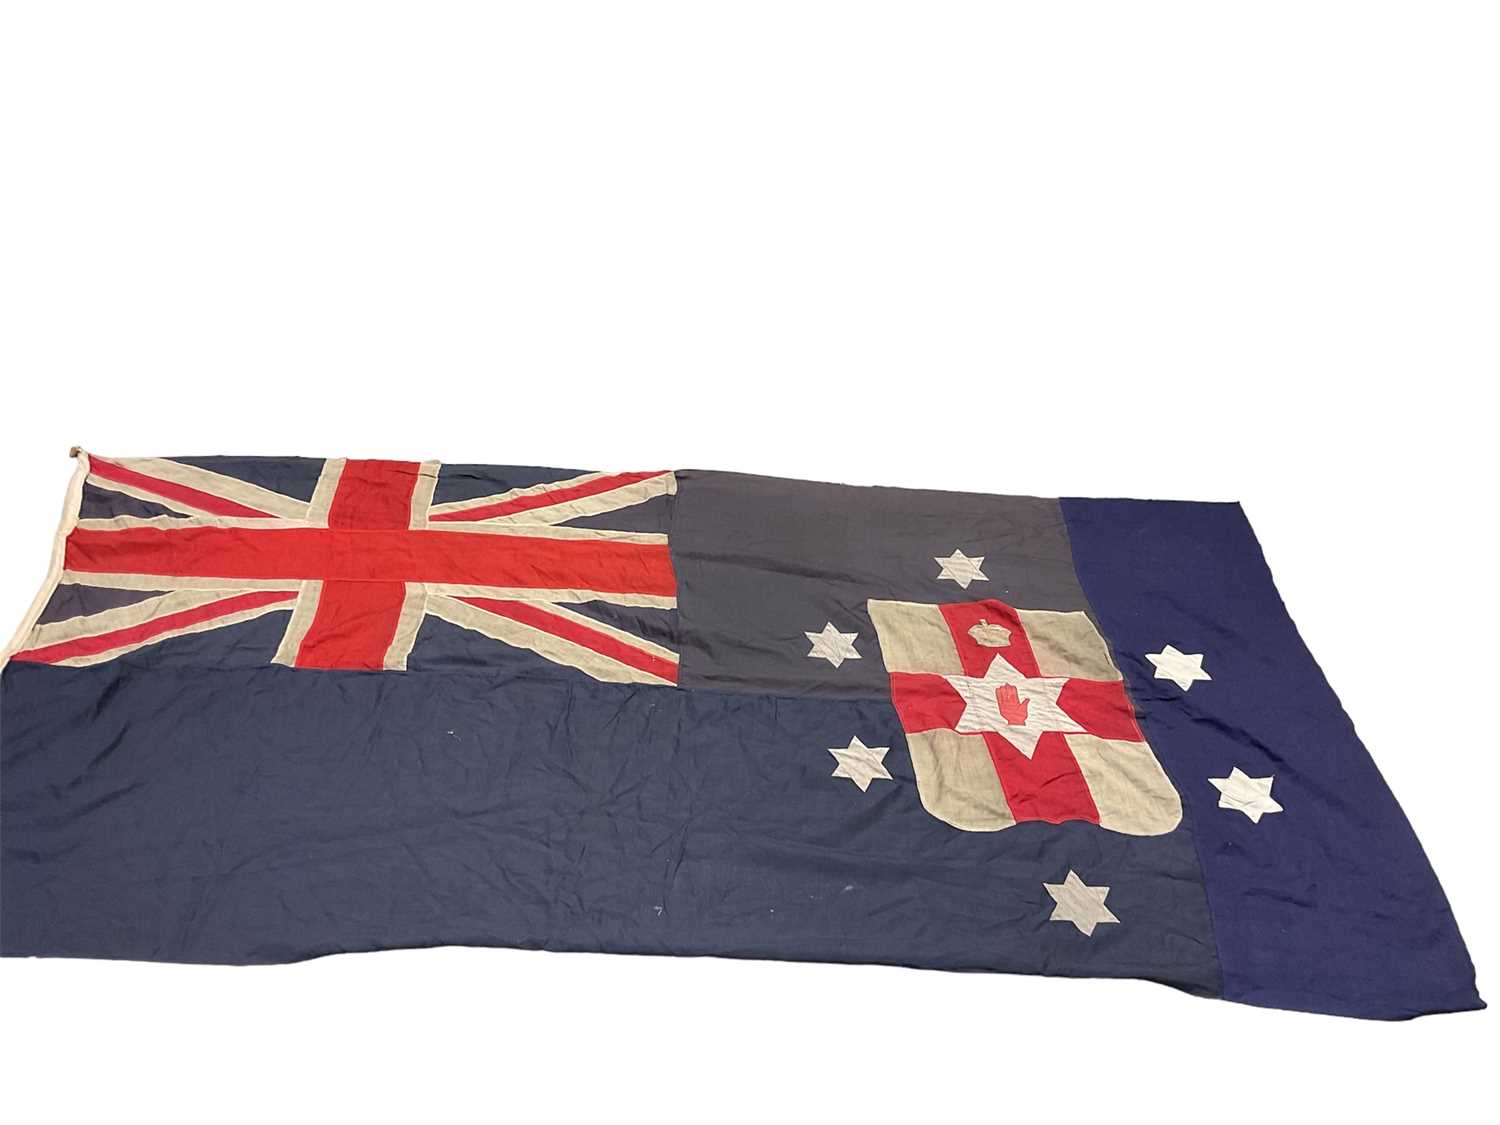 Lot 184 - Rare early 20th century early Northern Ireland Blue Ensign flag with crowned hand of Ulster on red and white shield surrounded by six stars Provenance: The vendors Grandfather was the Commanding Of...